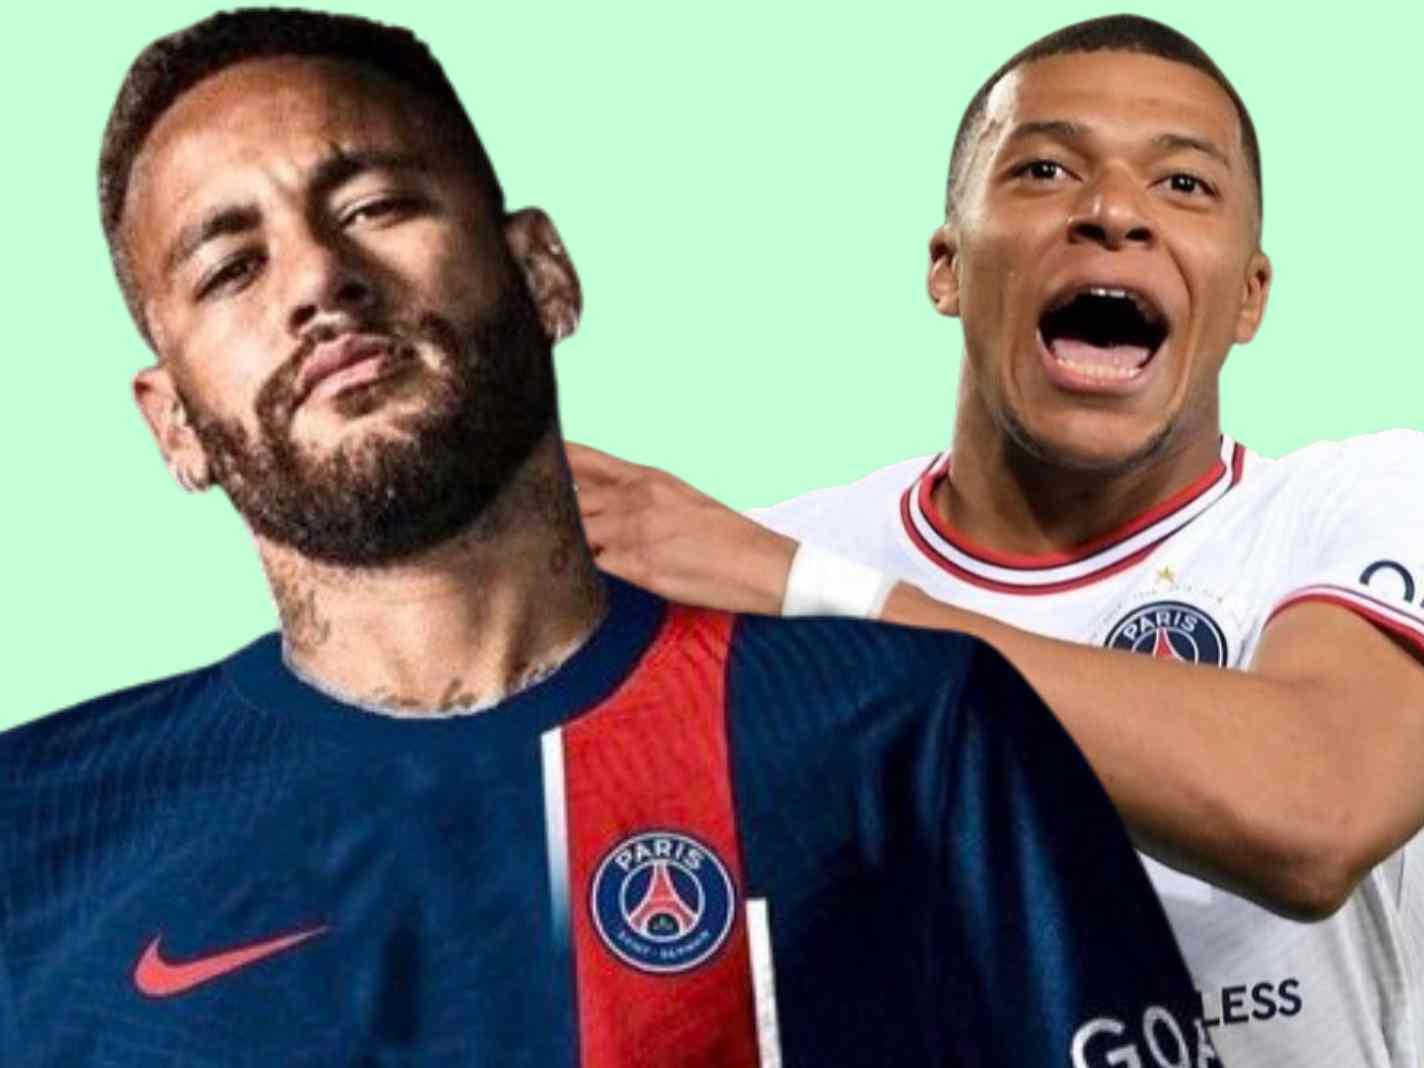 Did Twitter Account John Honesty Help Kylian Mbappe Engineer Neymar’s Exit from PSG? Conspiracy Theory Explained